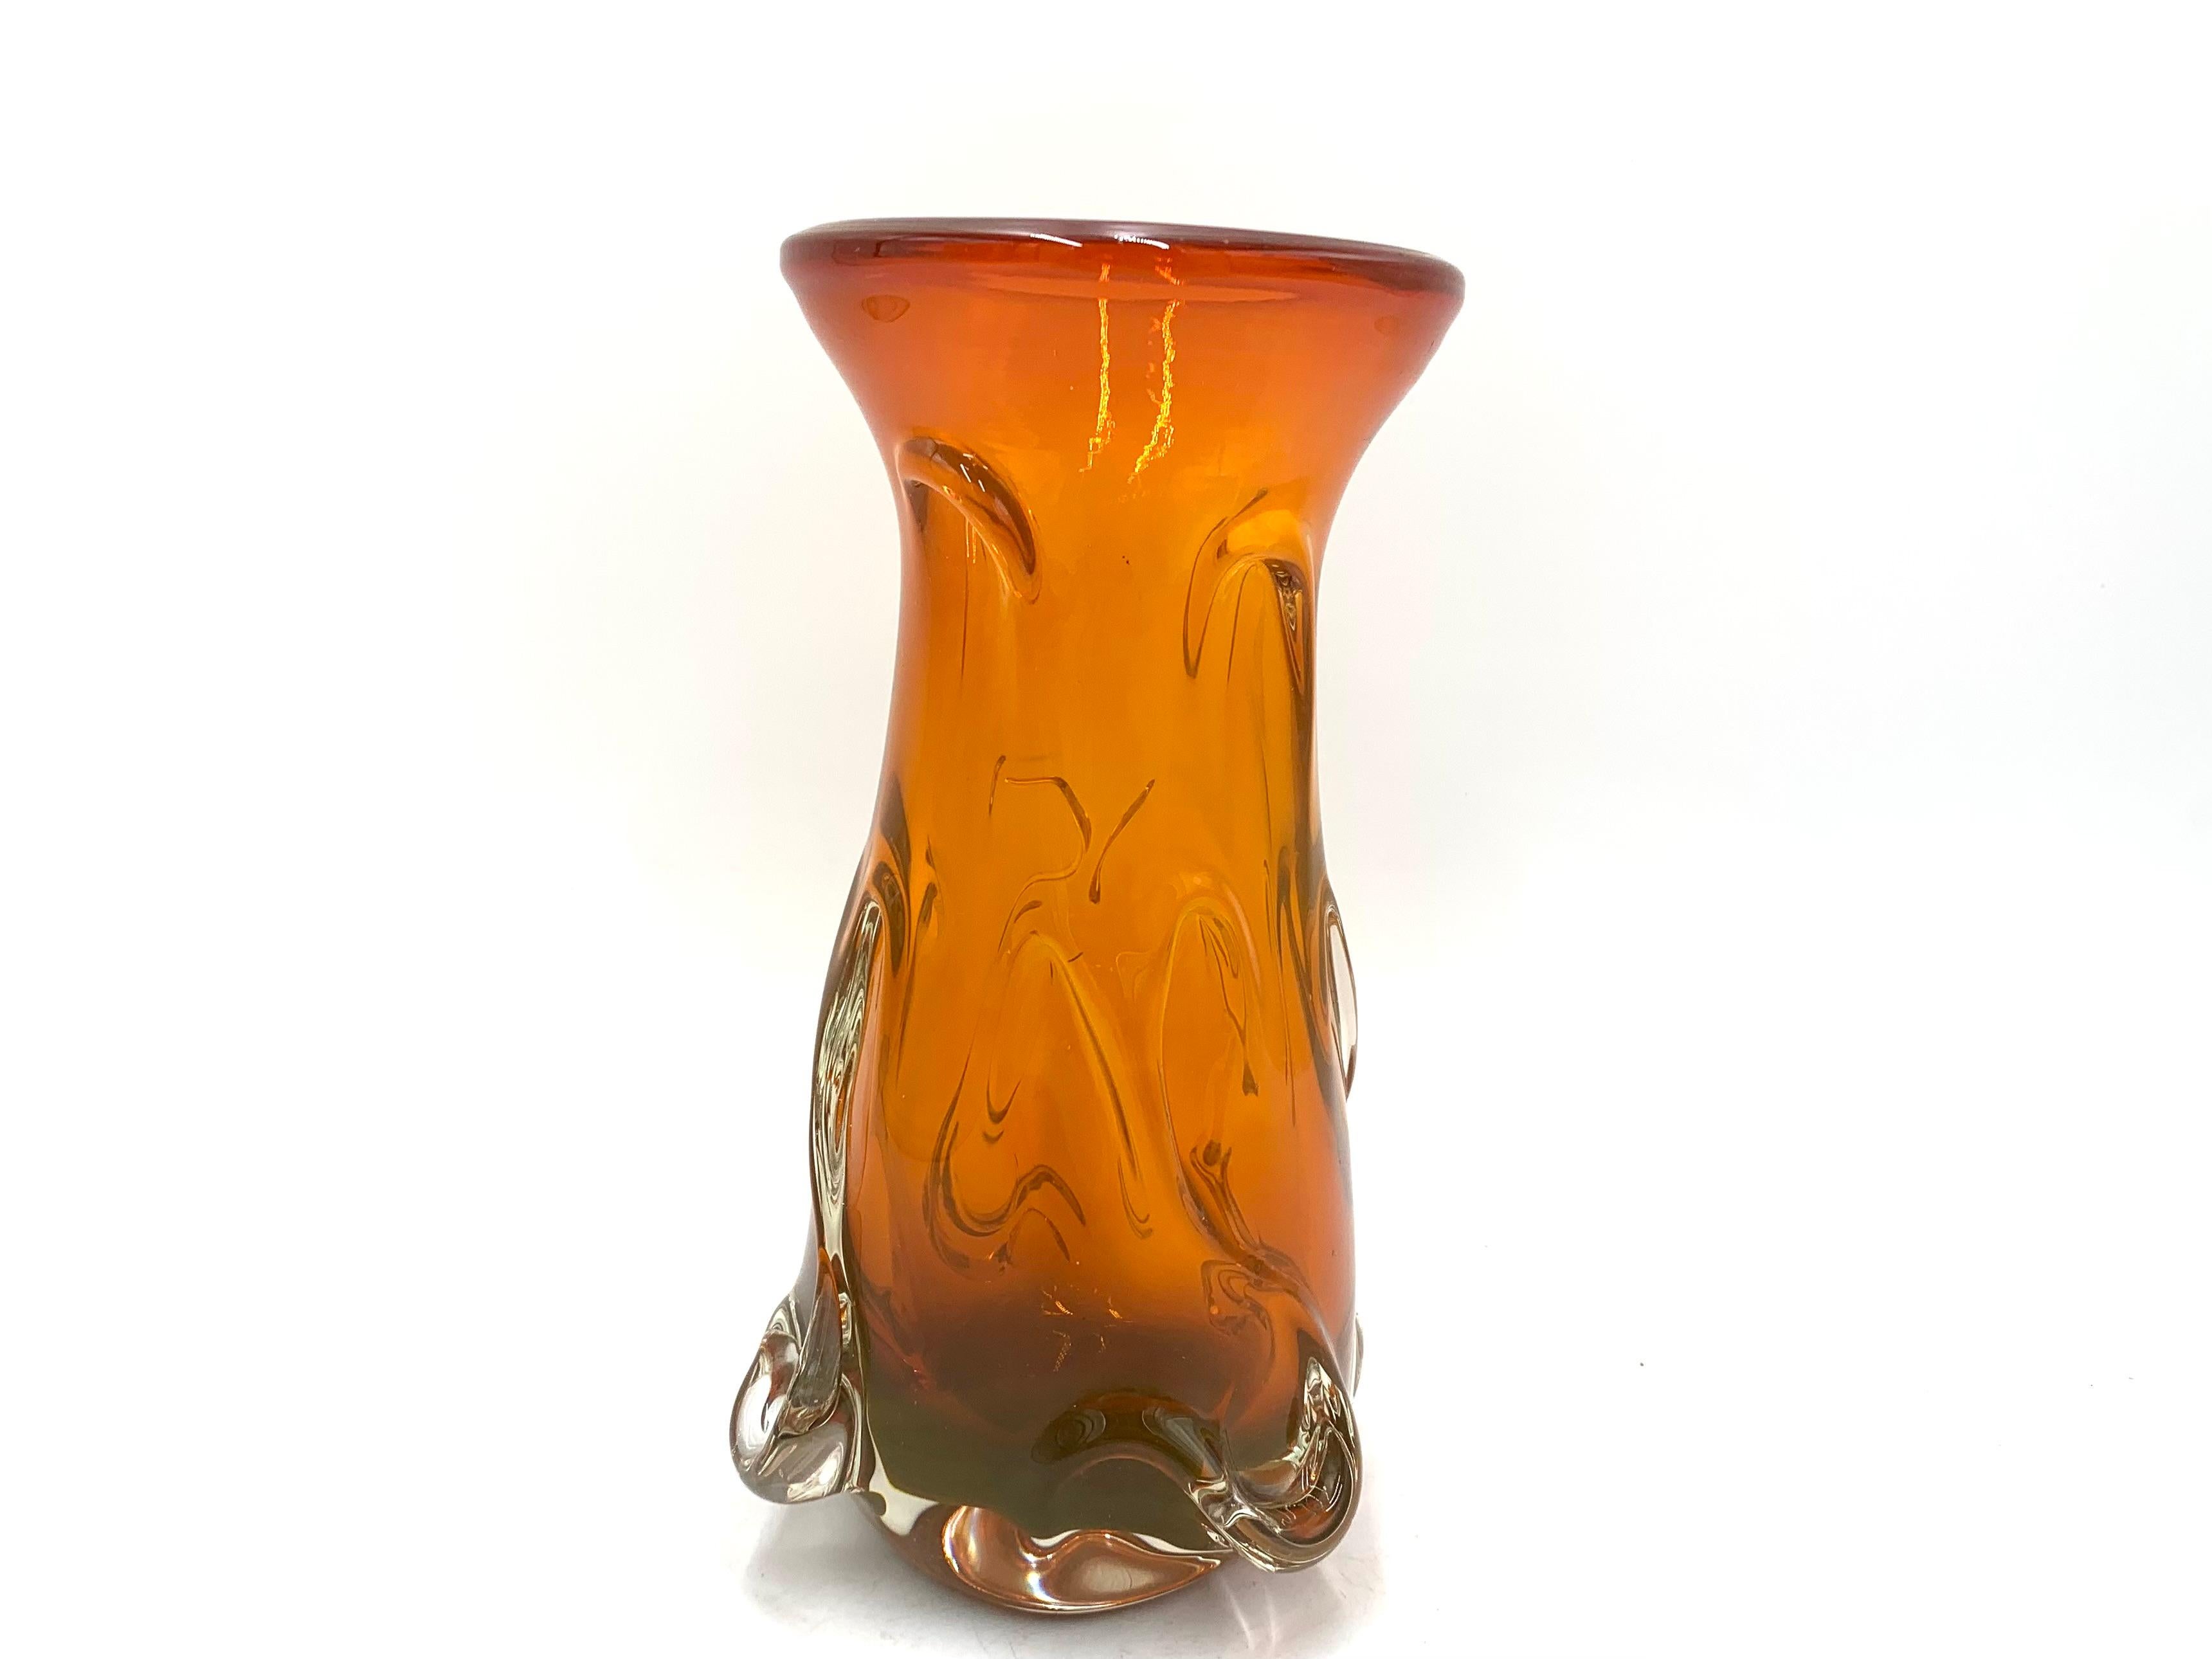 An orange vintage vase with an interesting shape.

Produced in Poland in the 1960s / 1970s.

Very good condition.

Measures: height 21.5 cm, diameter 12 cm.